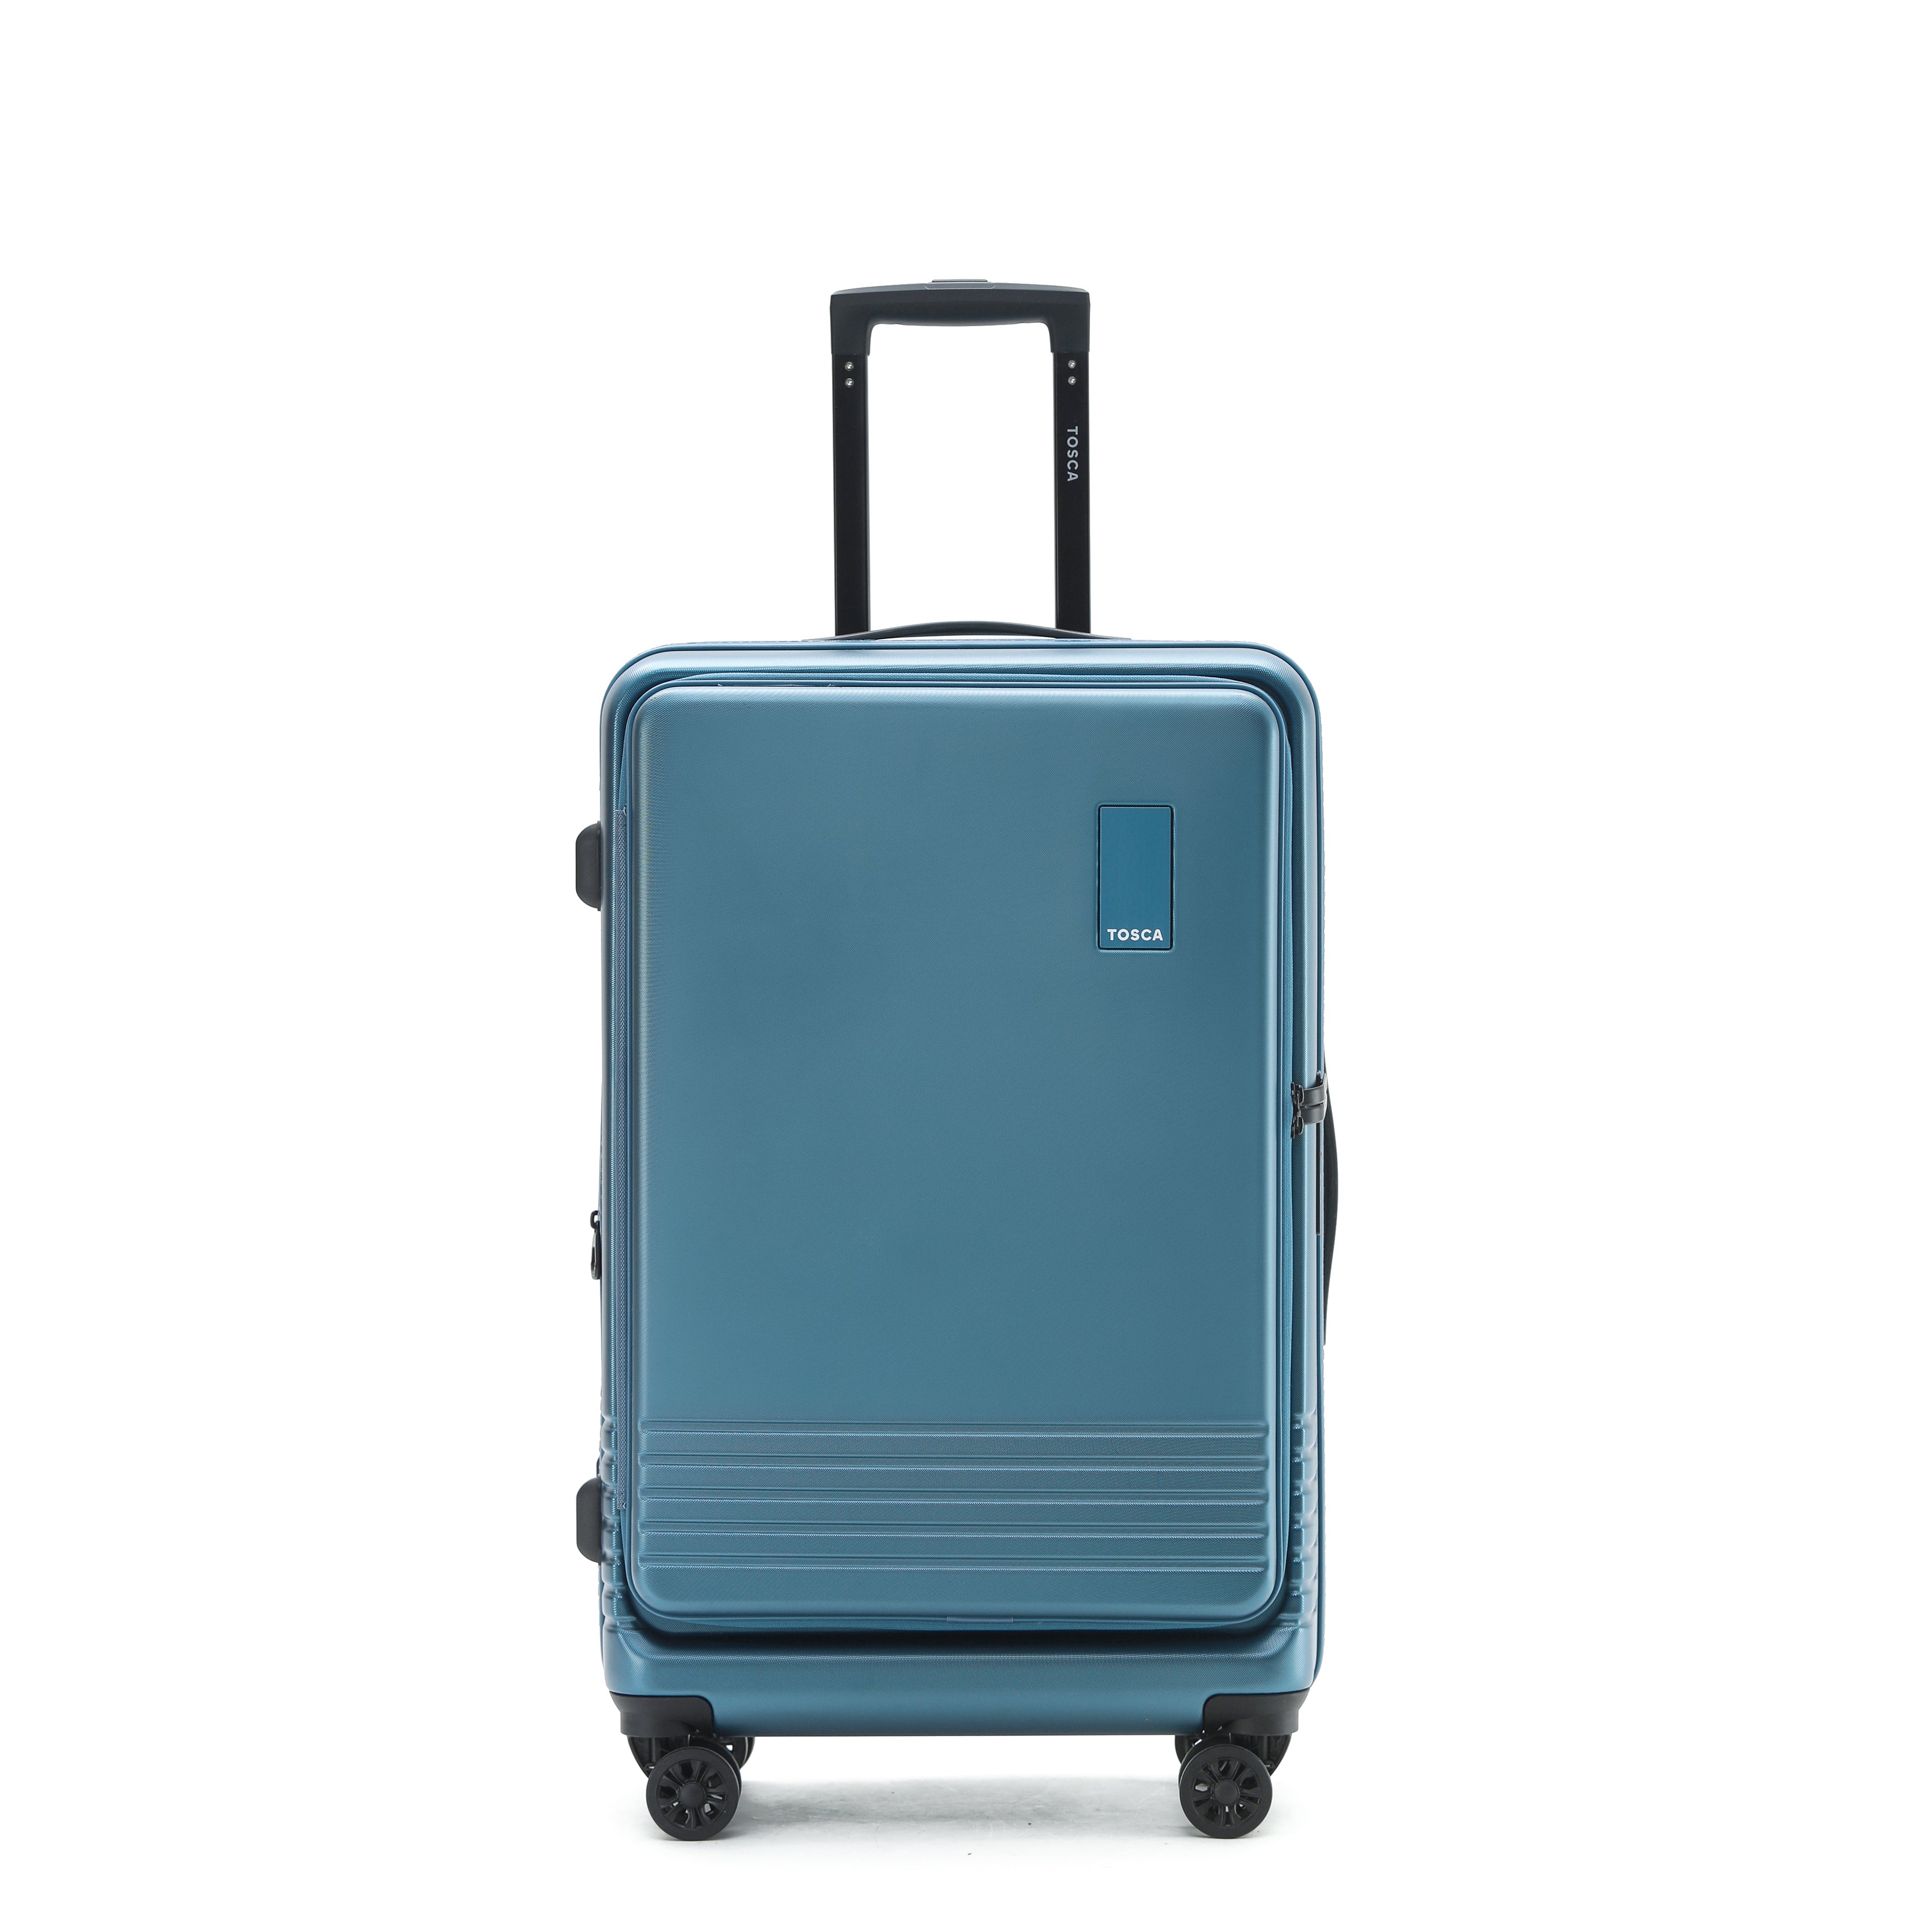 Tosca - TCA644 Horizon Front lid opening Set of 3 suitcases - Blue-5